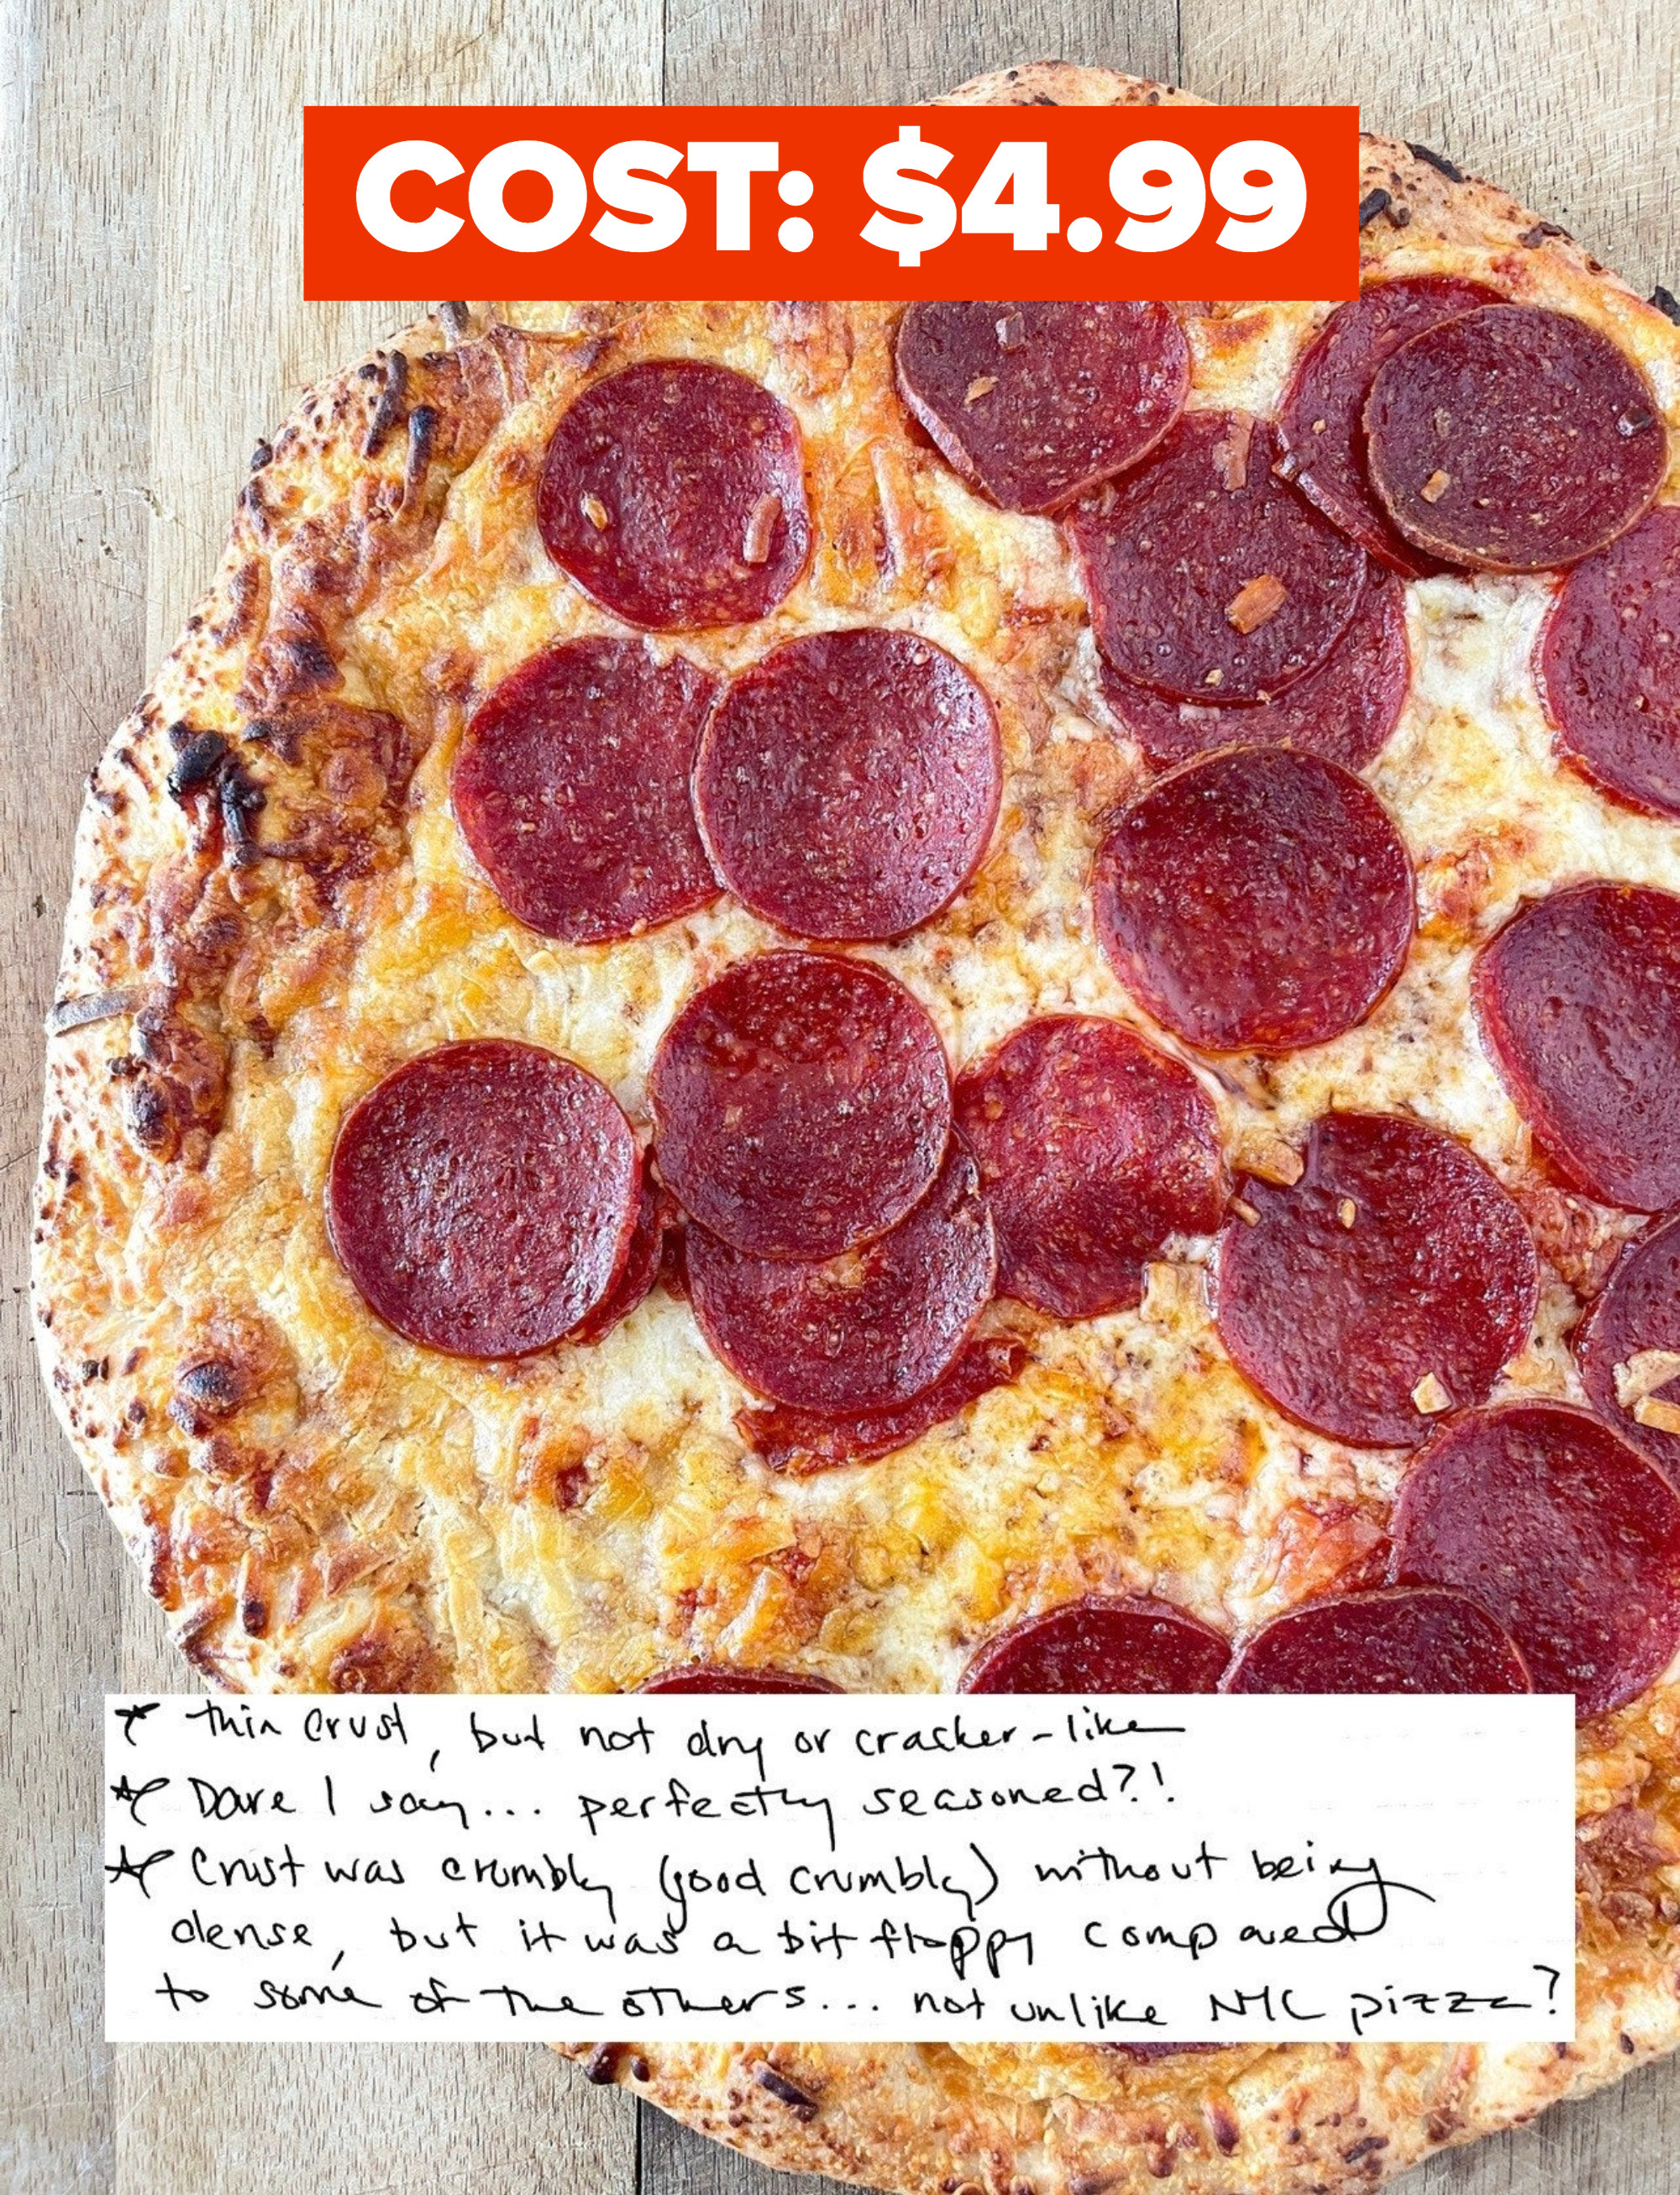 Red Baron Frozen Pizza that costs $4.99 with author&#x27;s handwritten notes